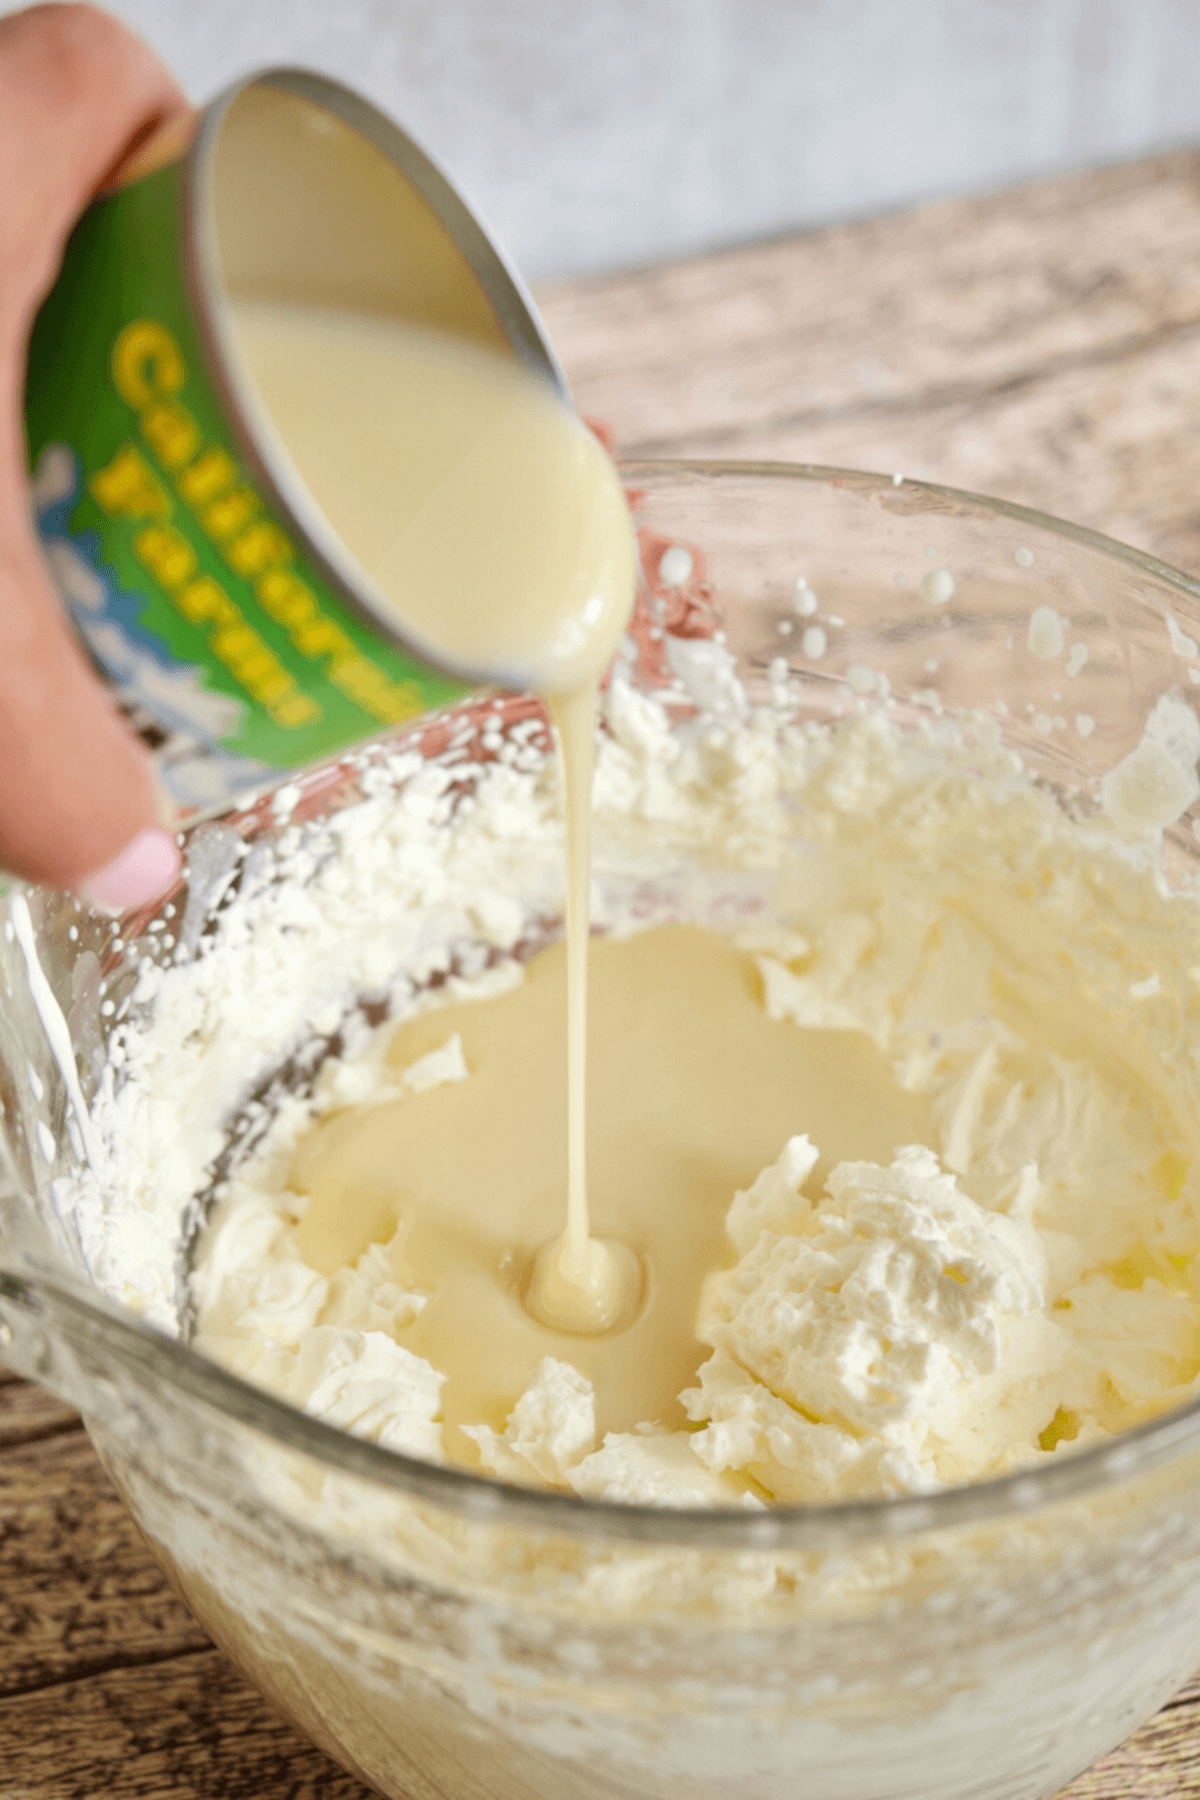 Hand pouring in can of organic sweetened condensed milk into whipped cream mixture.